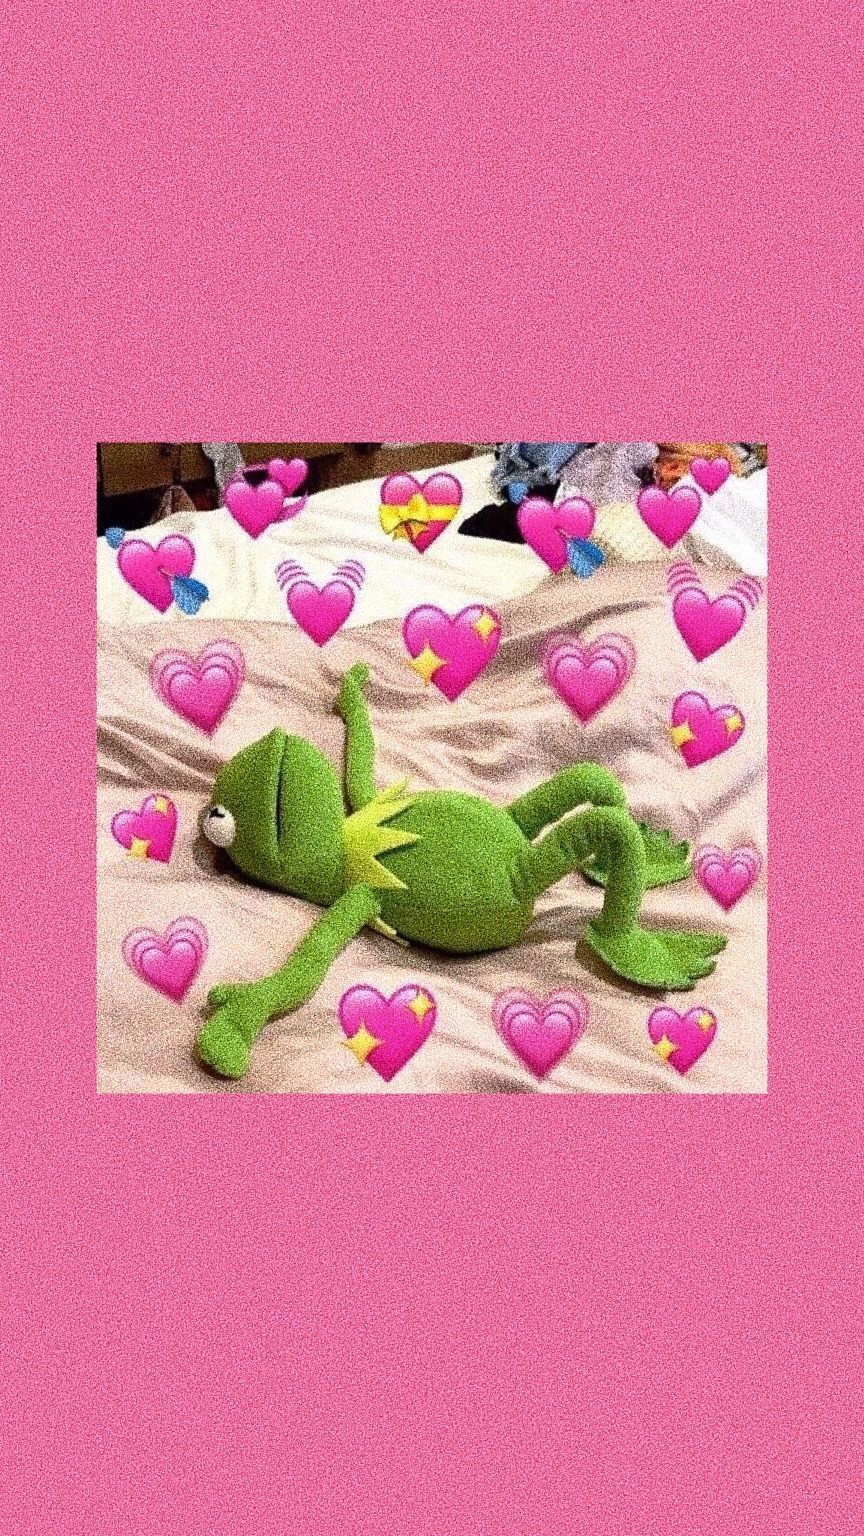 A green frog is laying on top of pink hearts - Kermit the Frog, frog